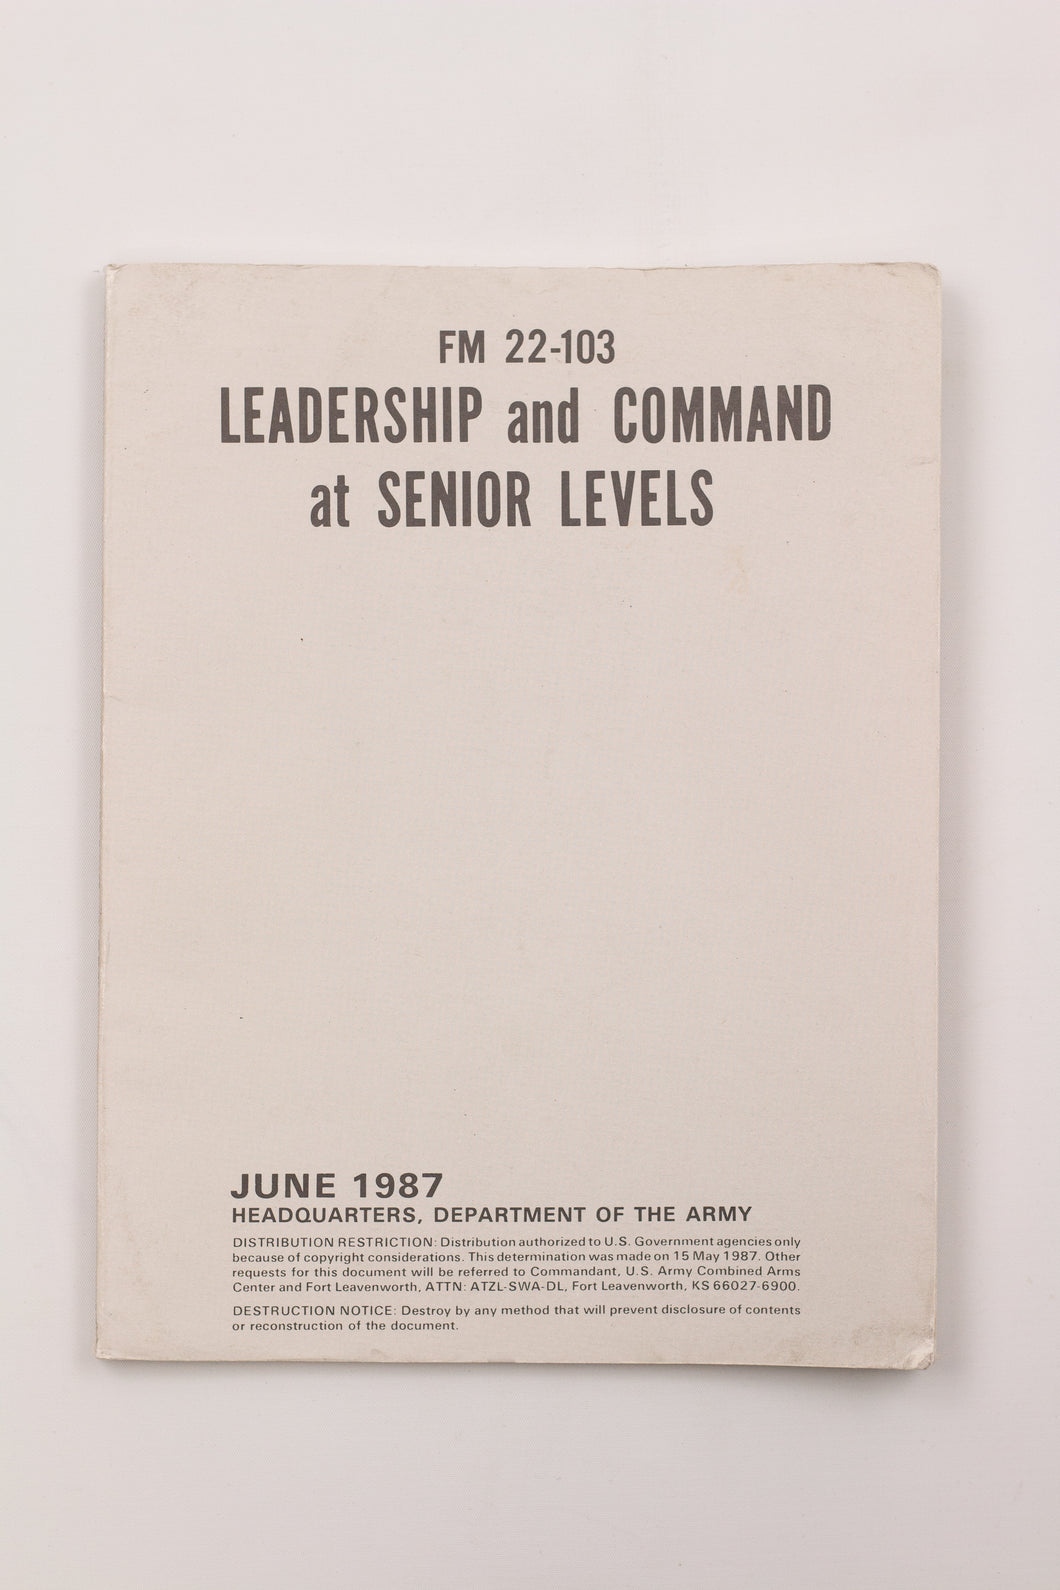 LEADERSHIP AND COMMAND AT SENIOR LEVELS